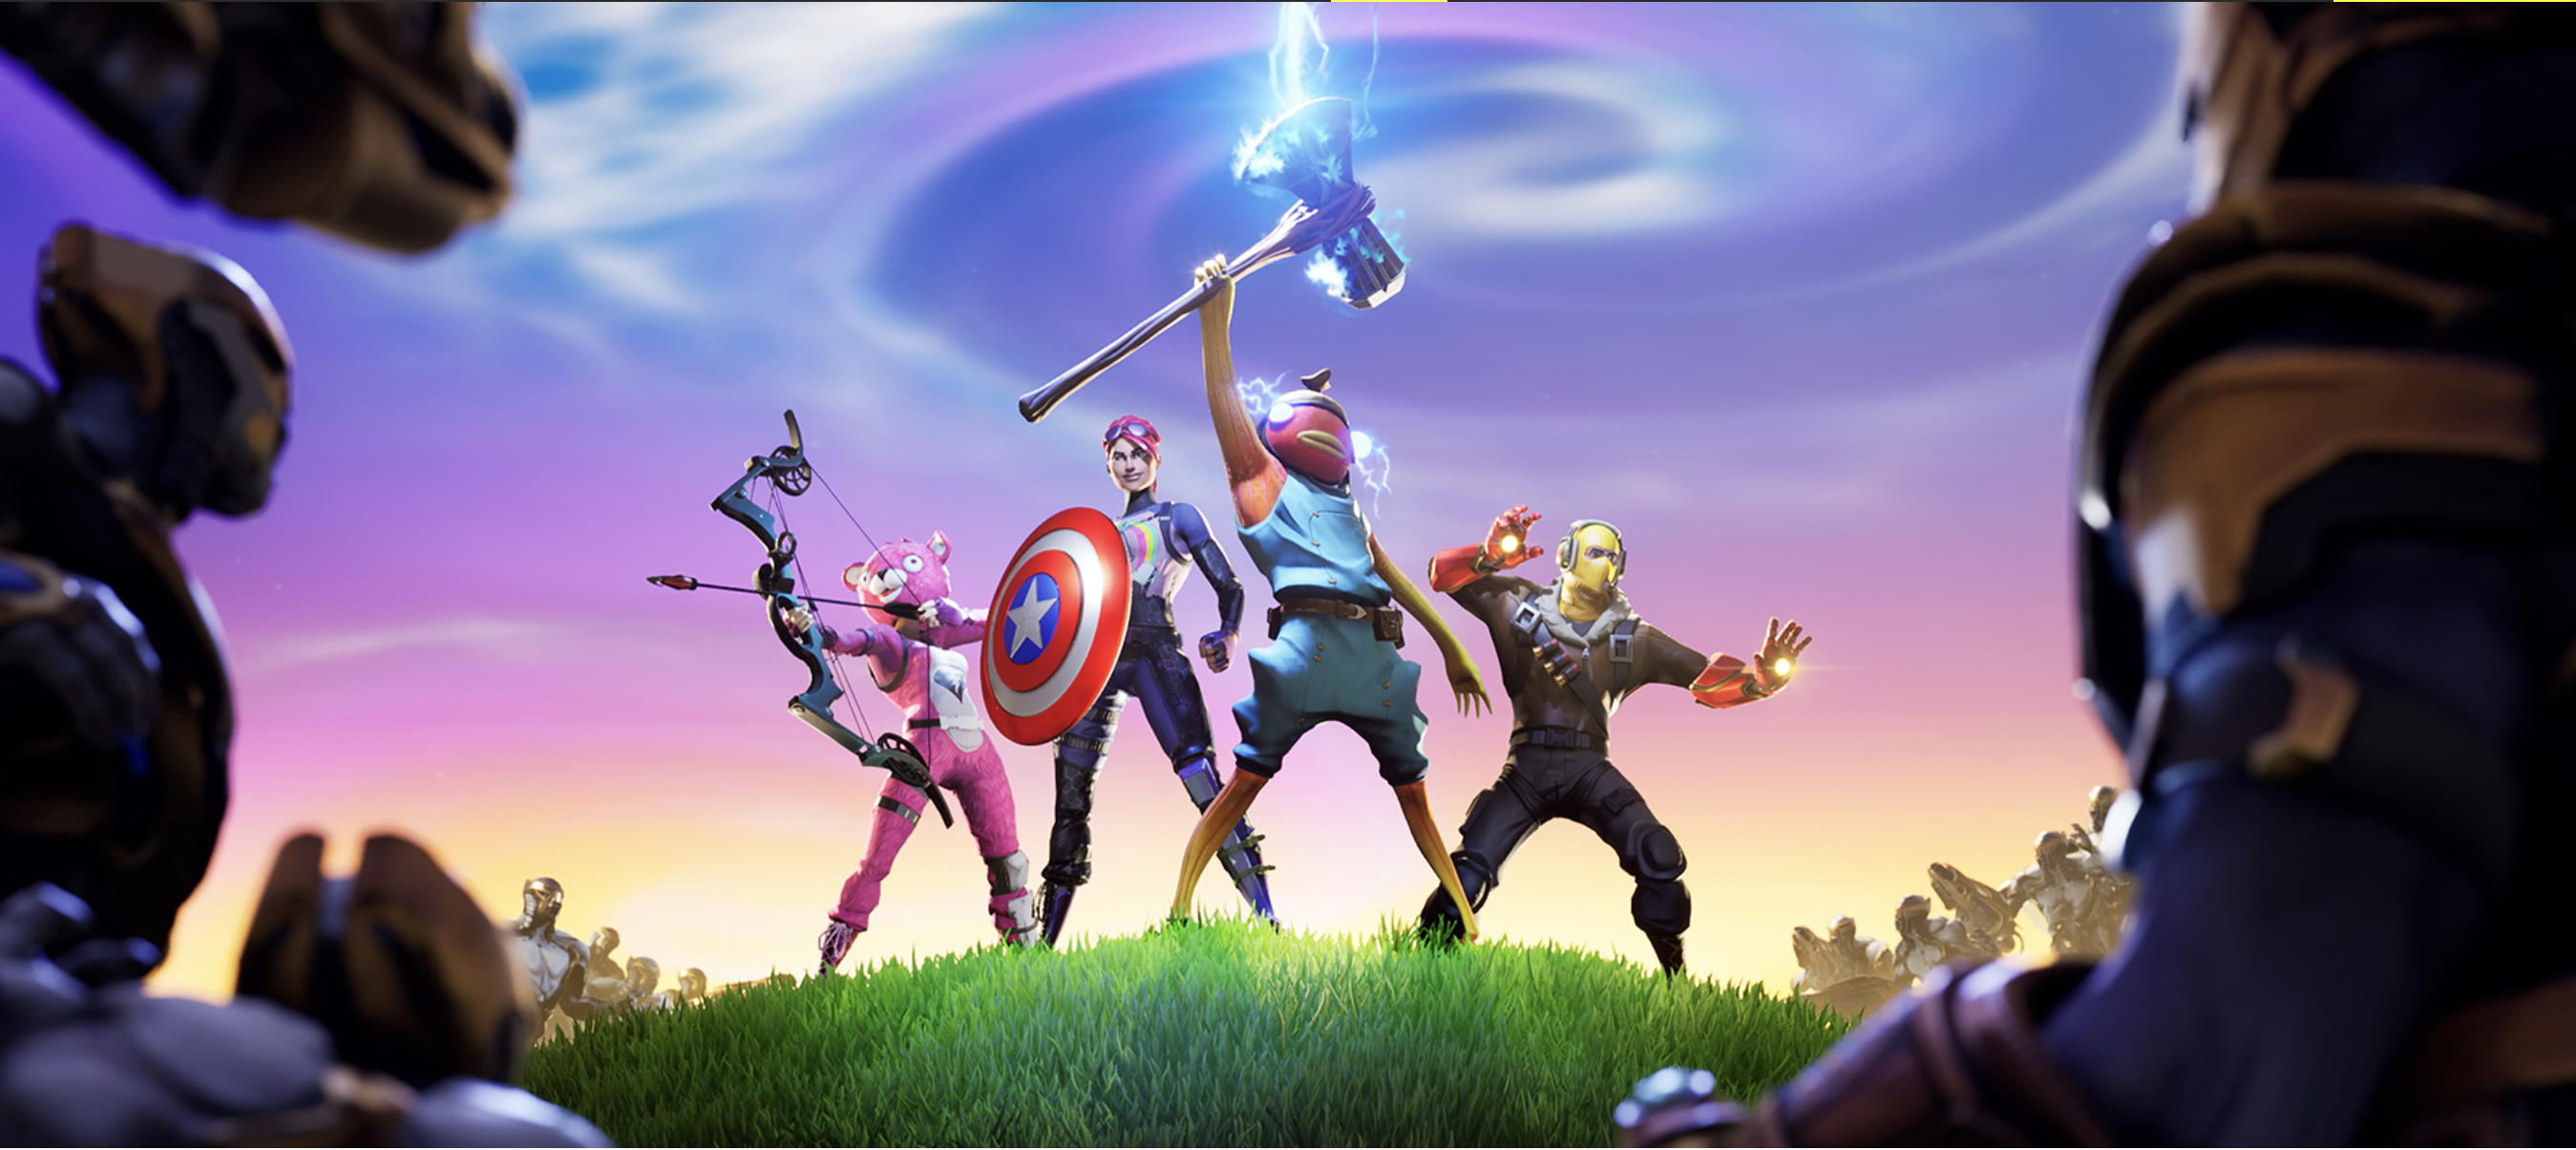 get your avengers endgame fix early with the all new fortnite collaboration - new avengers skins fortnite